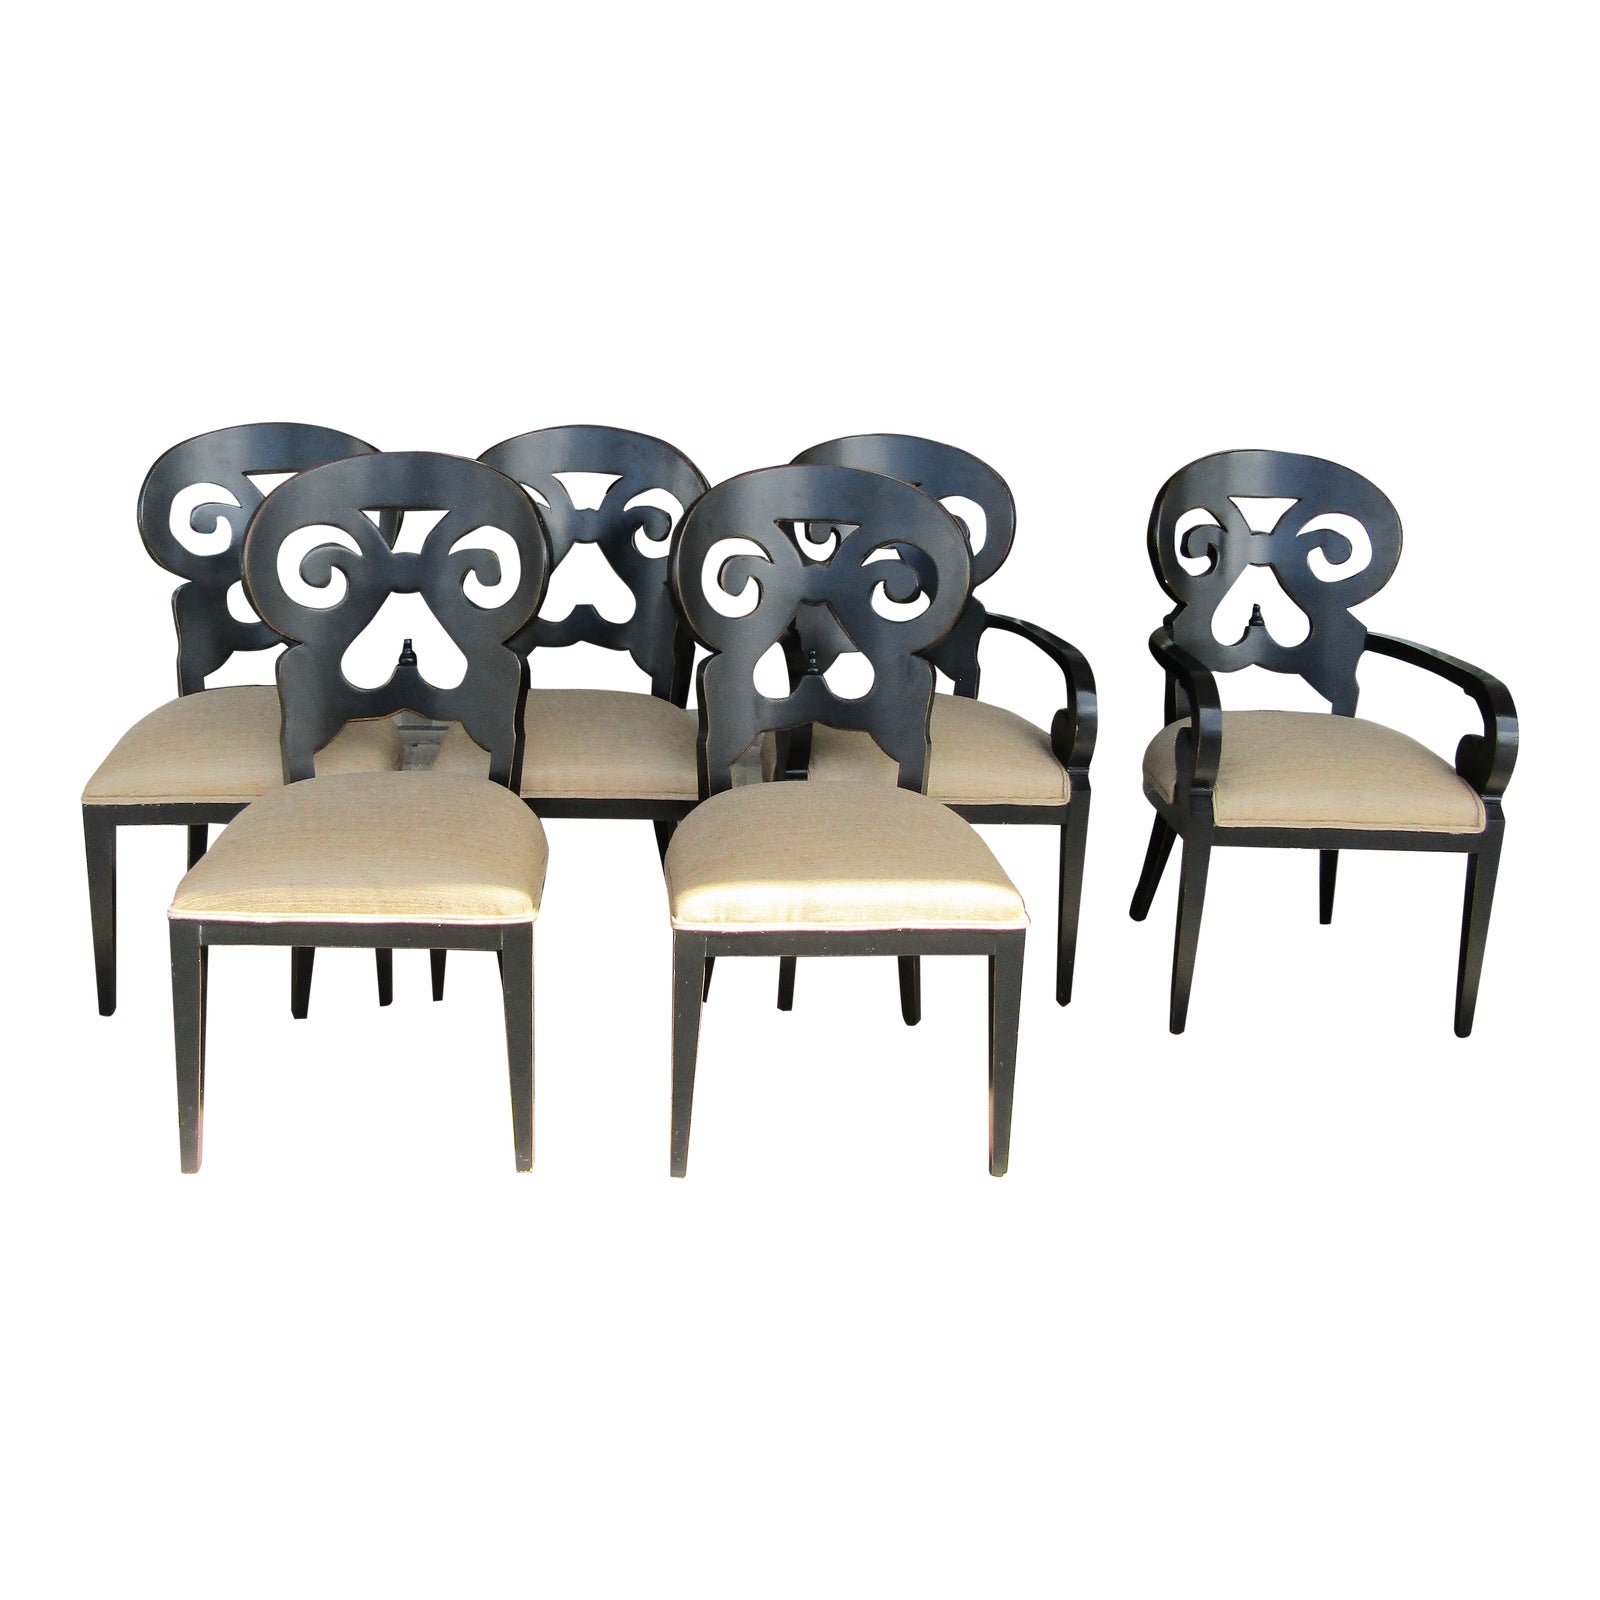 Get a Bargain Deal on 6 Sturdy Wood Chairs in Mississauga/Peel Region, Ontario